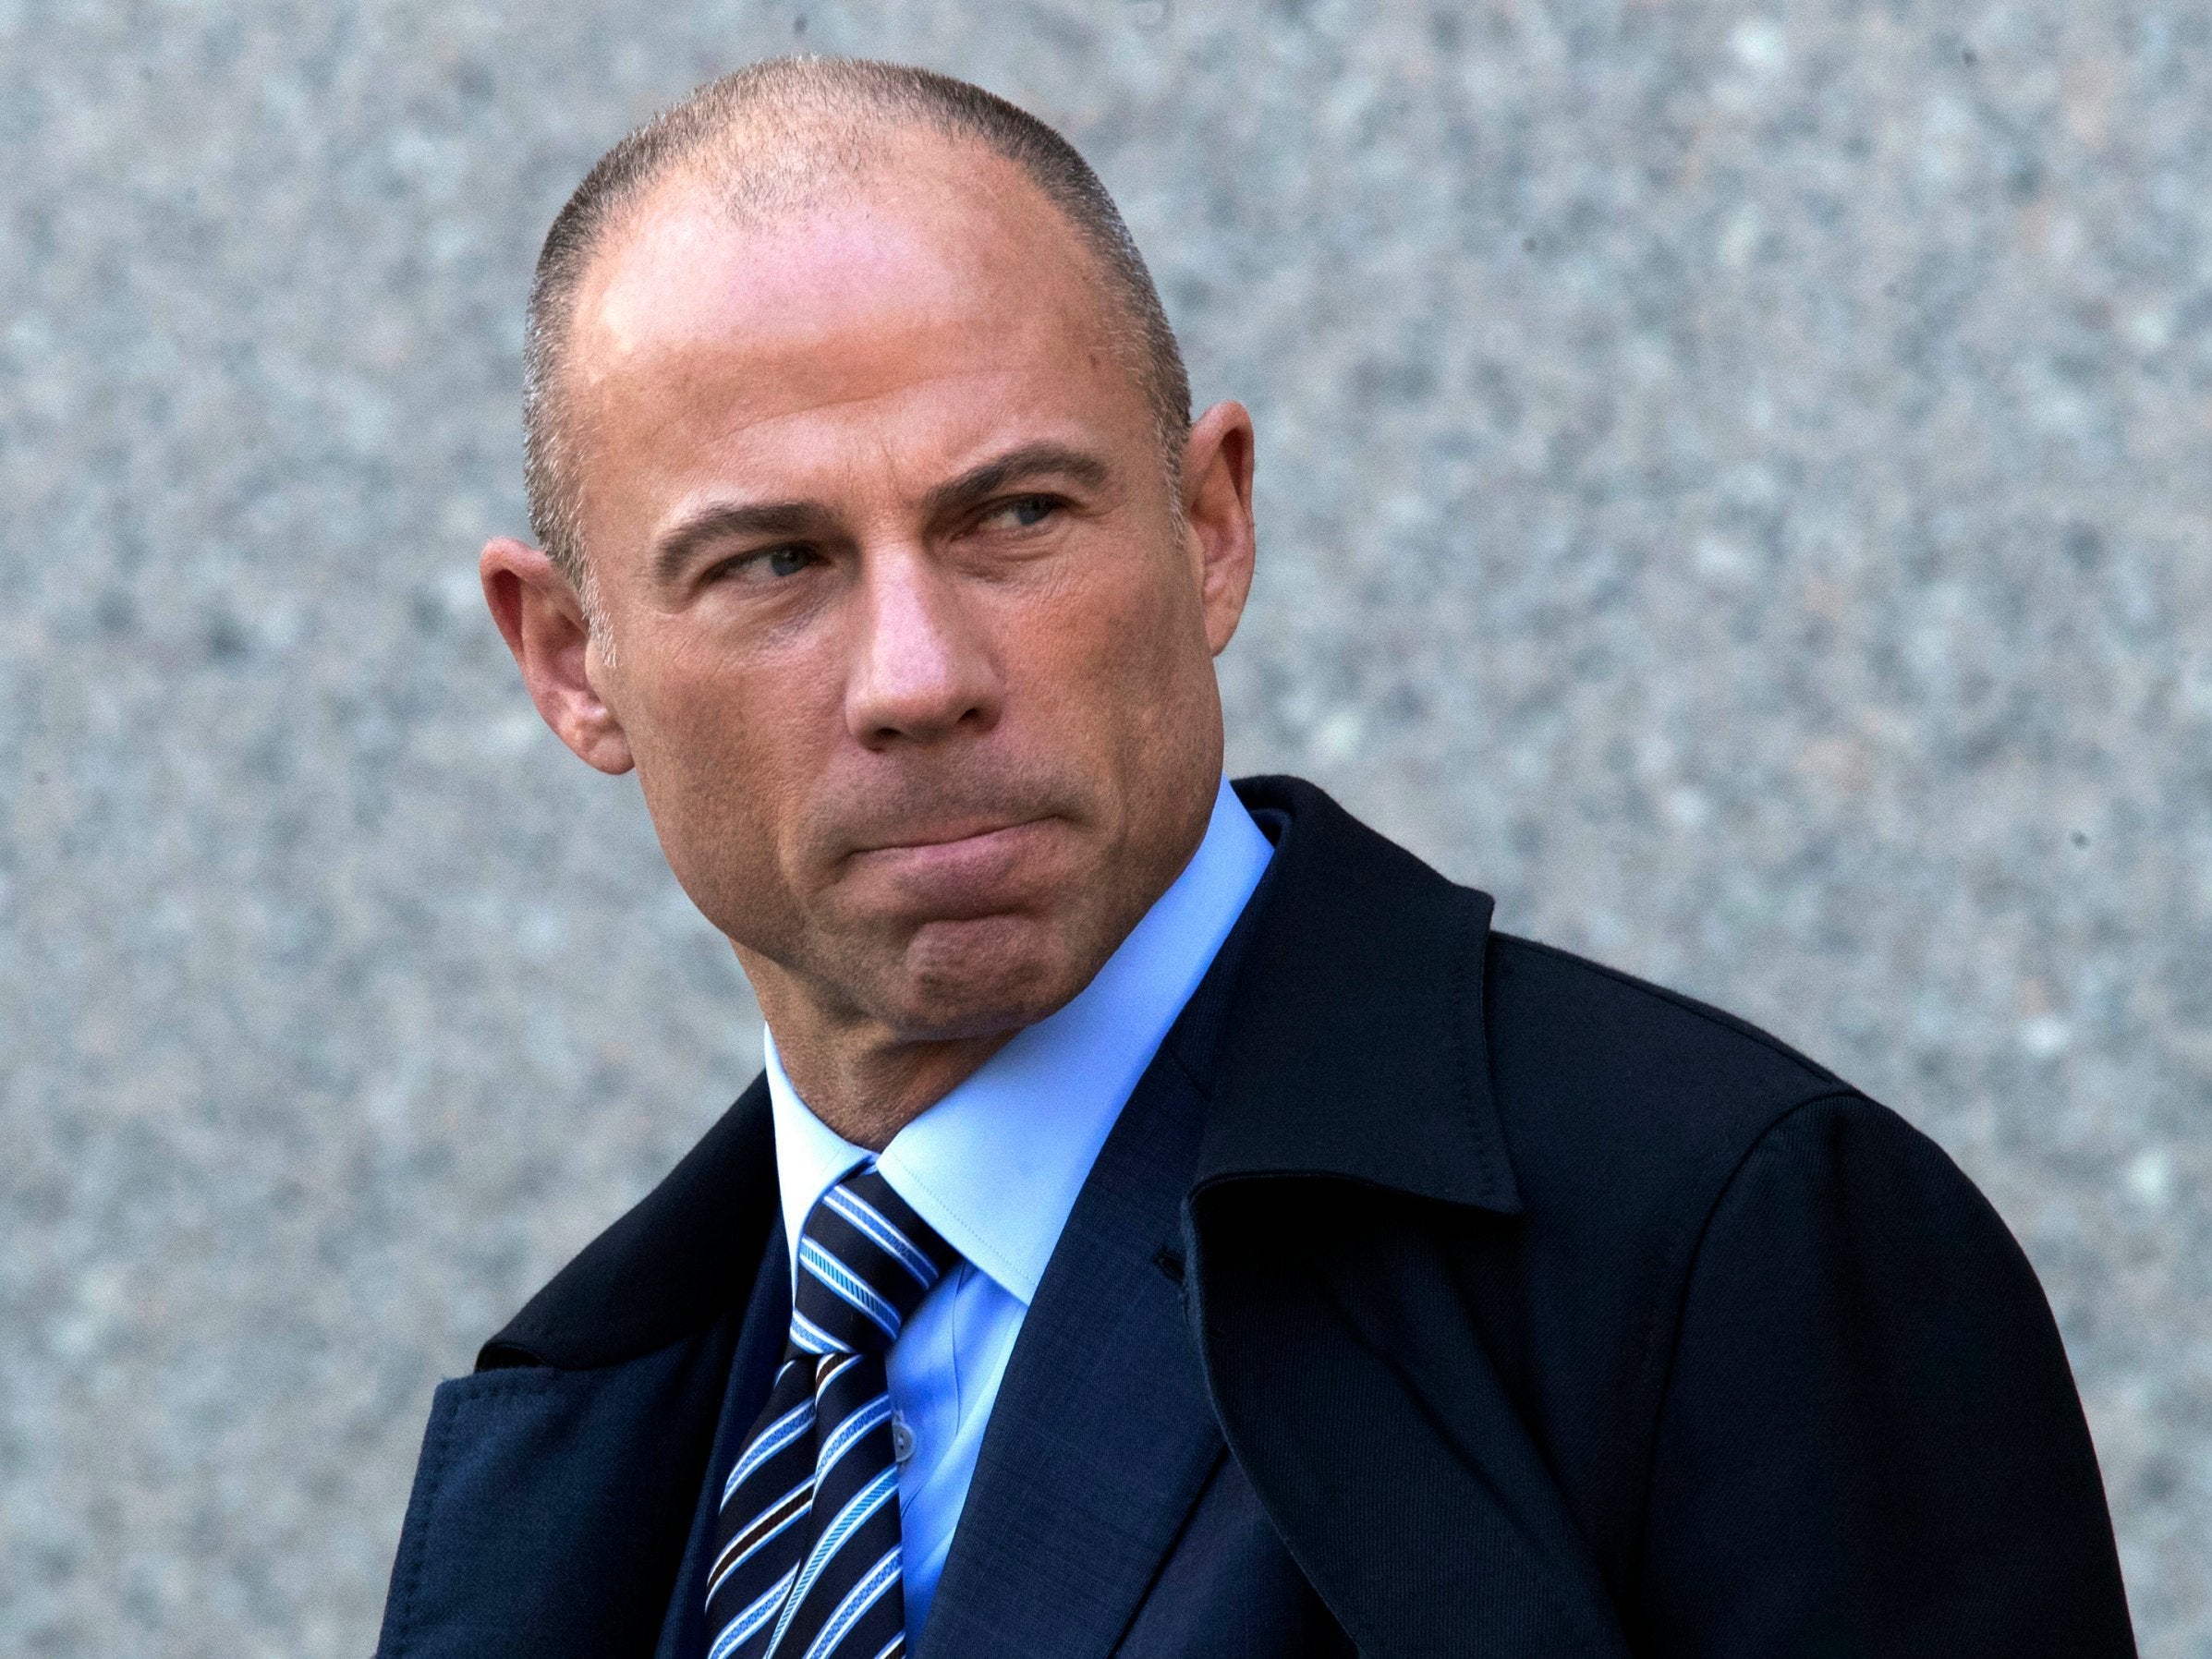 Stormy Daniels' lawyer says he now represents three other women against Donald Trump ...